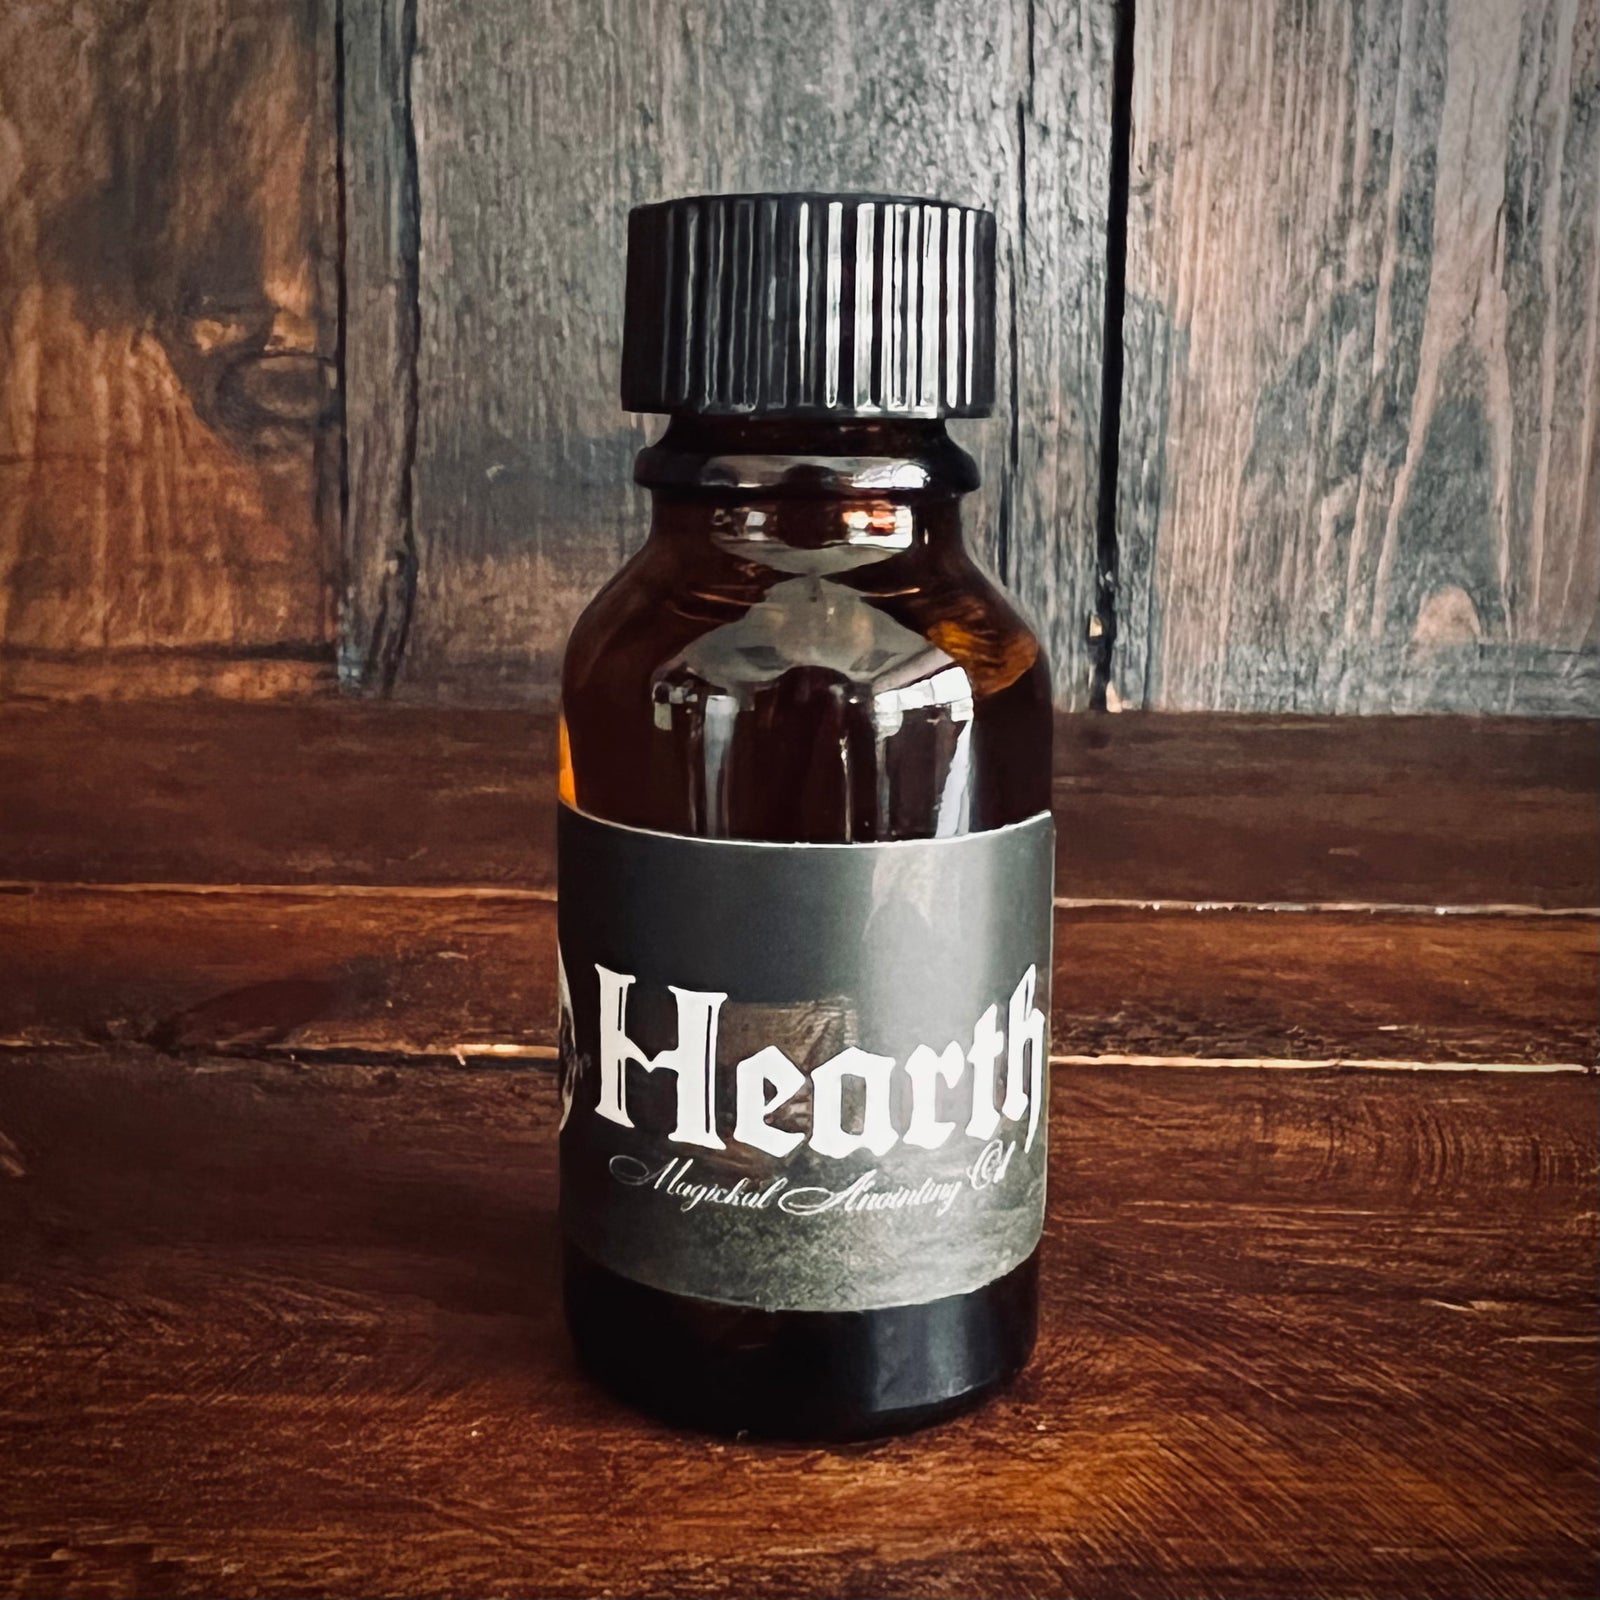 Hearth Anointing Oil